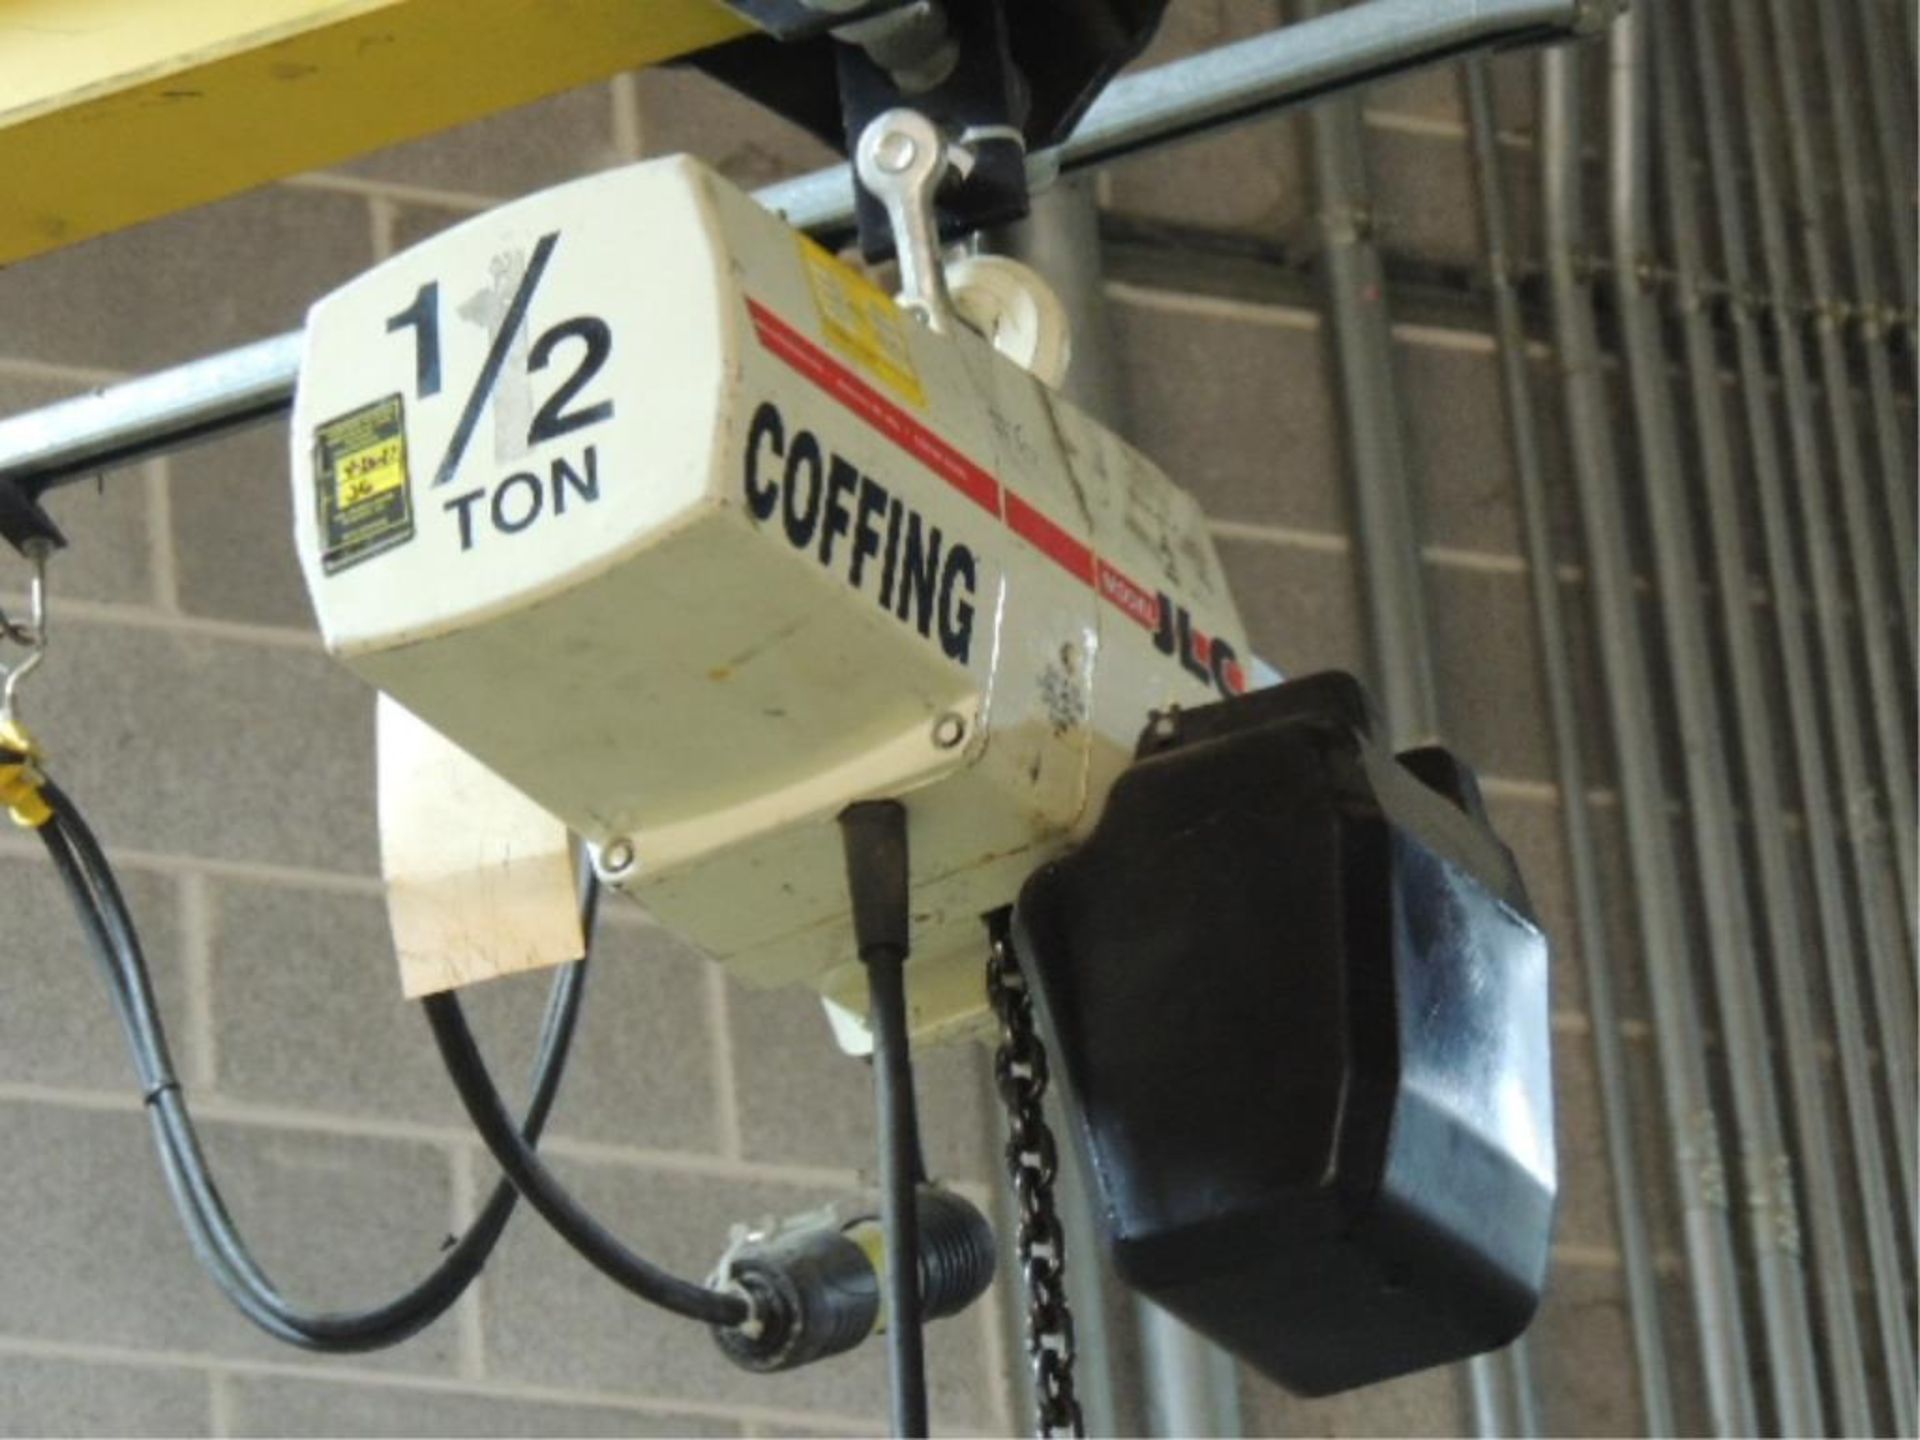 Abell-Howe Jib Crane, beam mounted, 12' swing arm, Coffing 1/2 ton electric chain hoist w/ - Image 2 of 3